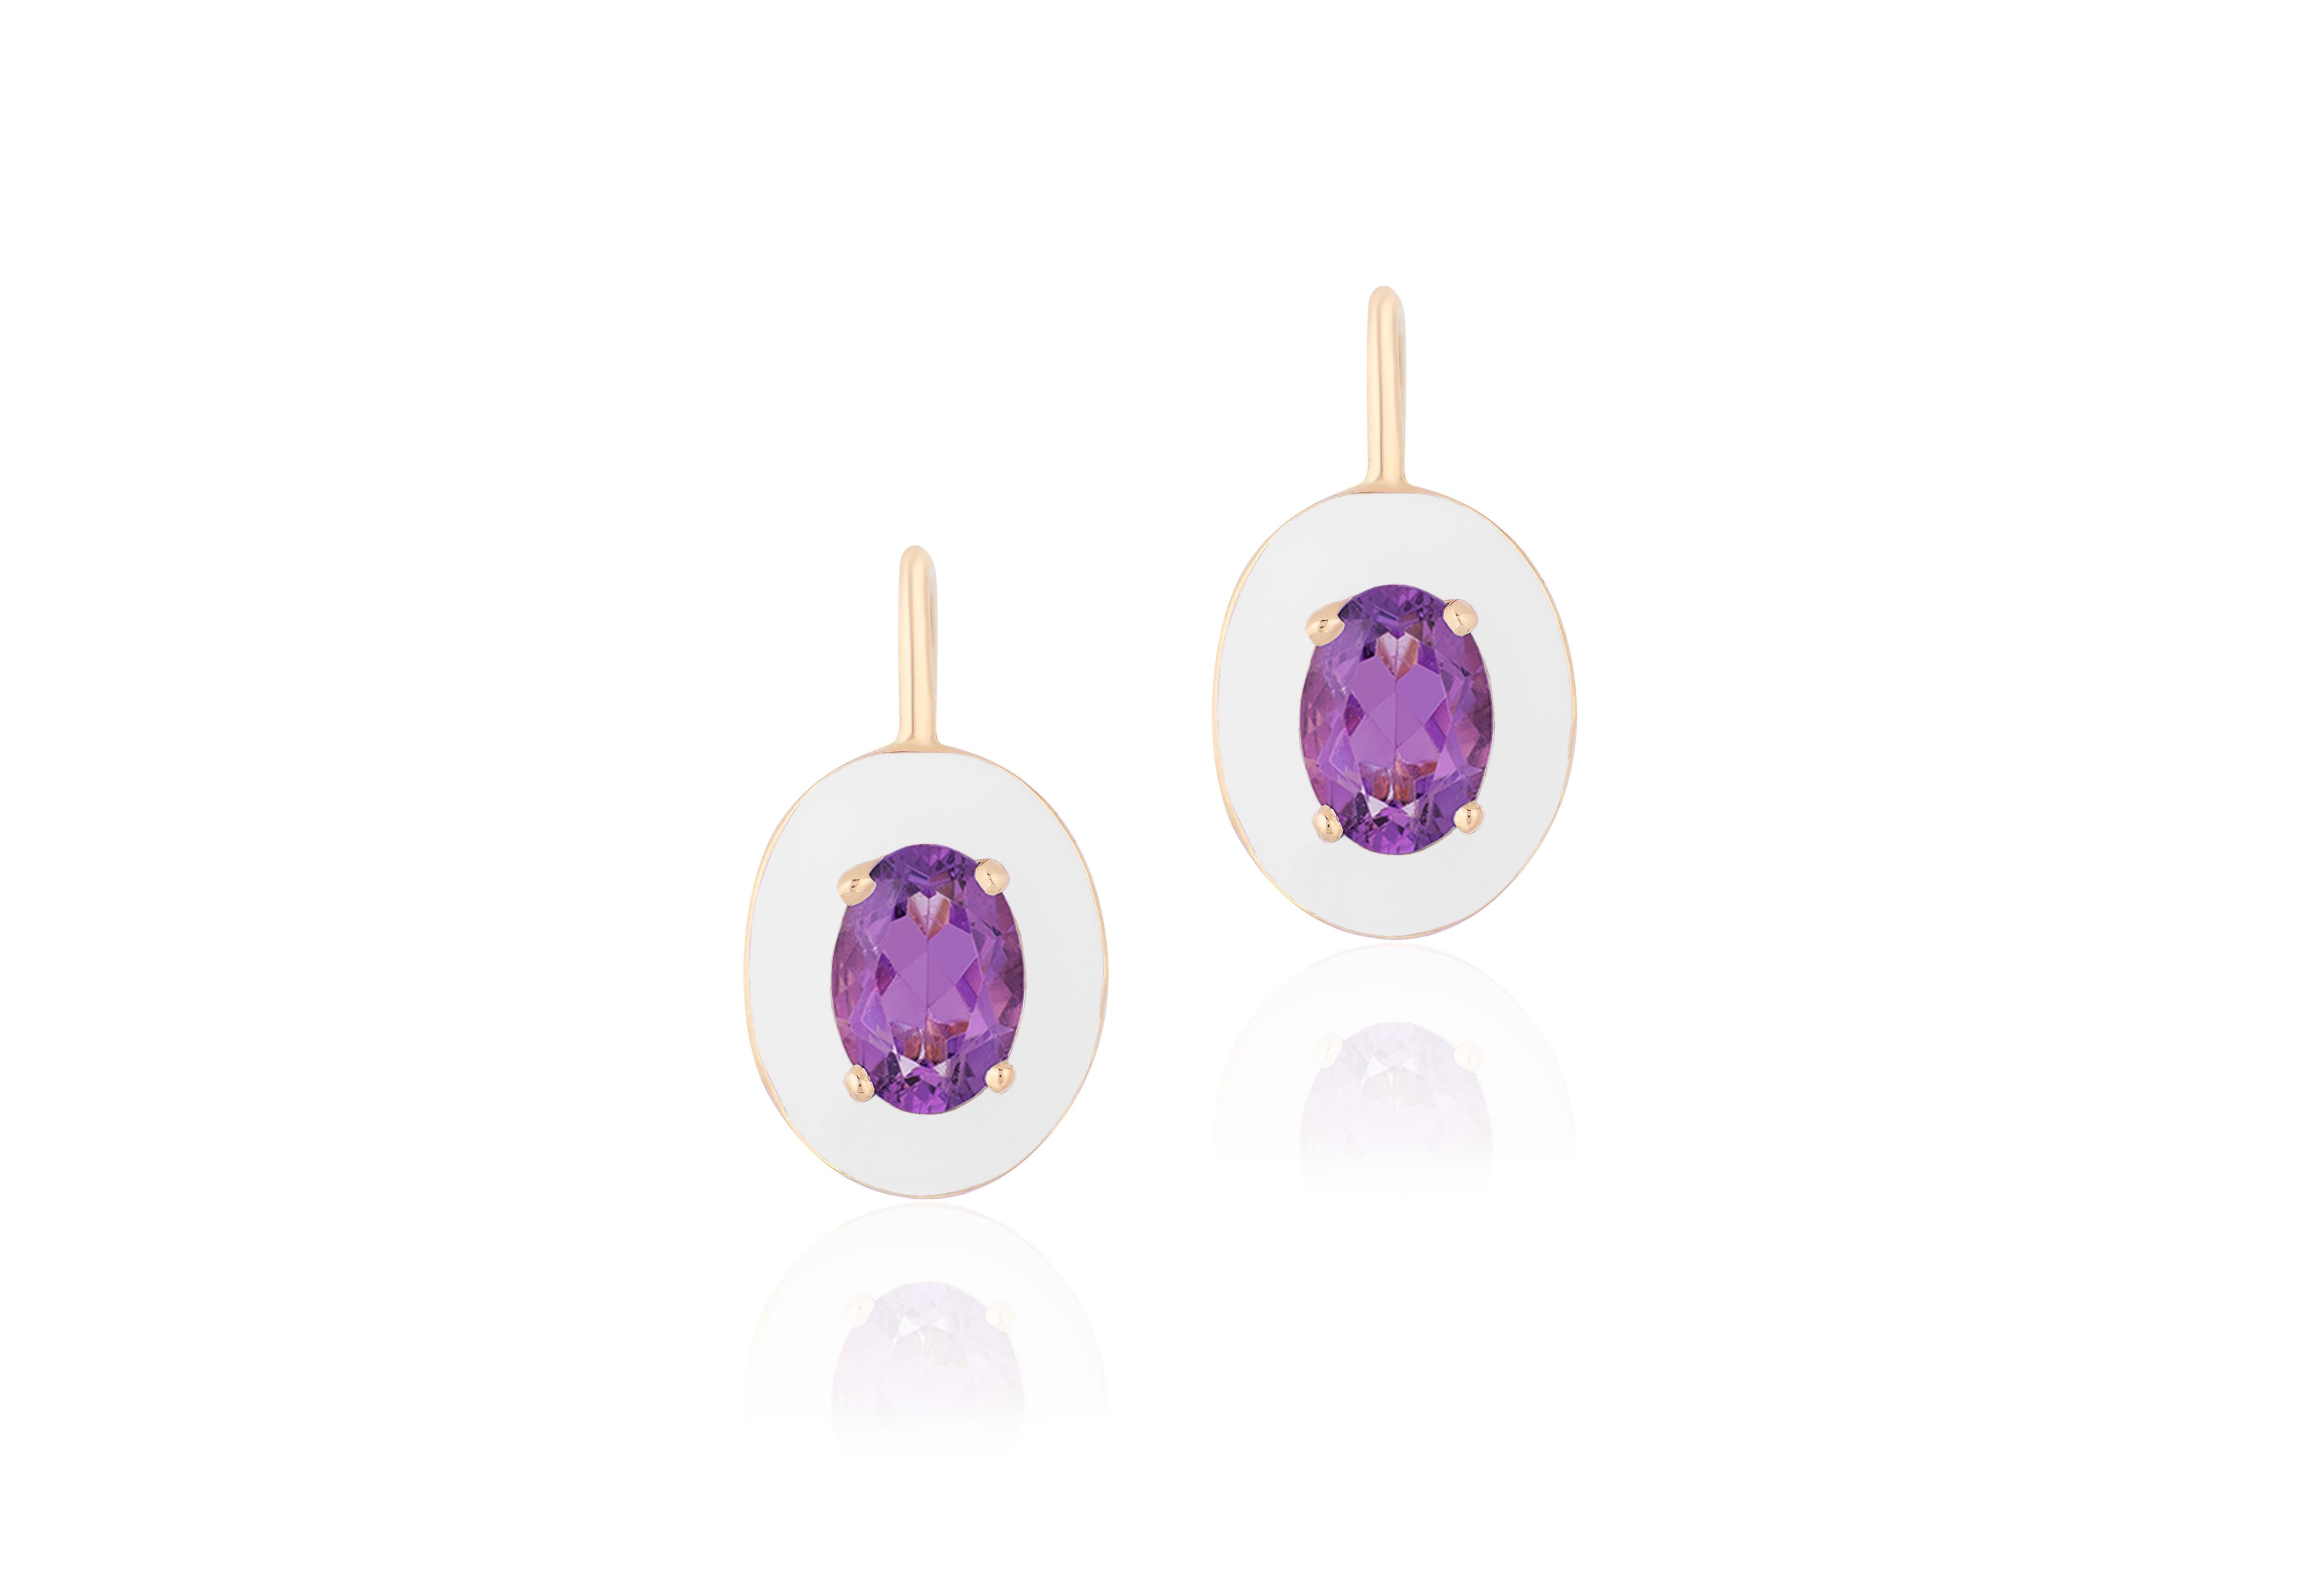 These unique earrings are a Faceted Oval Amethyst, with White Enamel border and Lever back. From our ‘Queen’ Collection, it was inspired by royalty, but with a modern twist. The combination of enamel, and Amethyst represents power, richness and